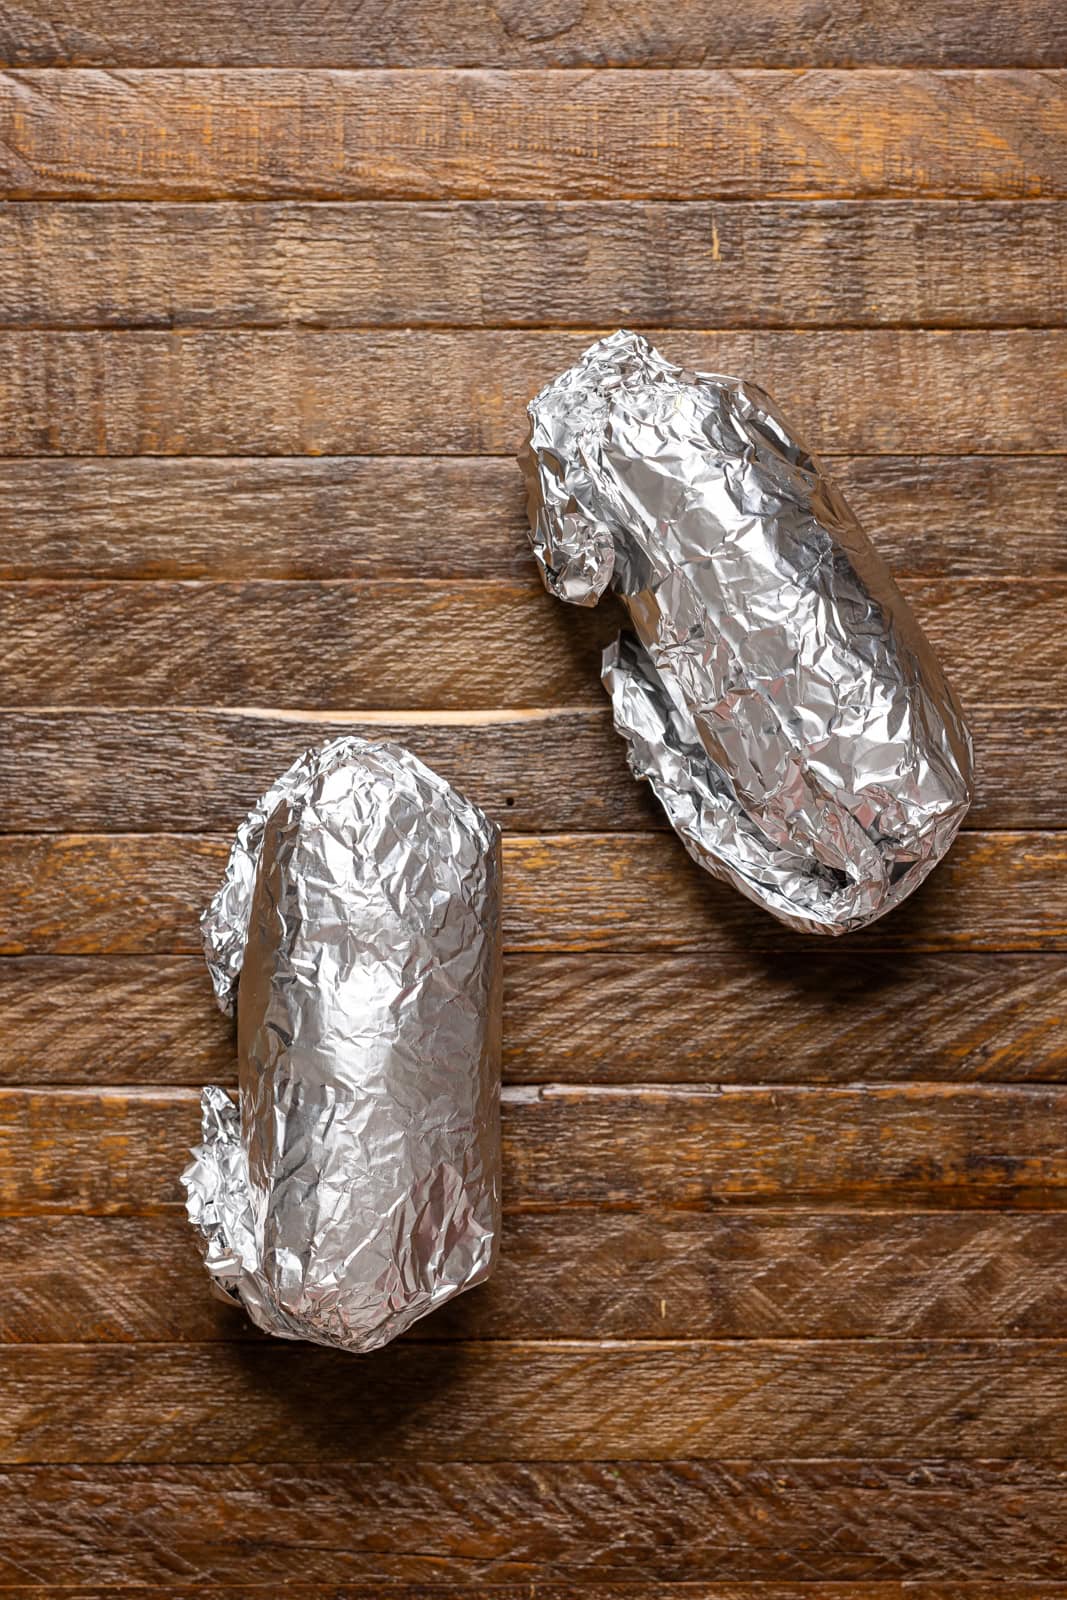 Burritos wrapped up in foil paper on a brown wood table.